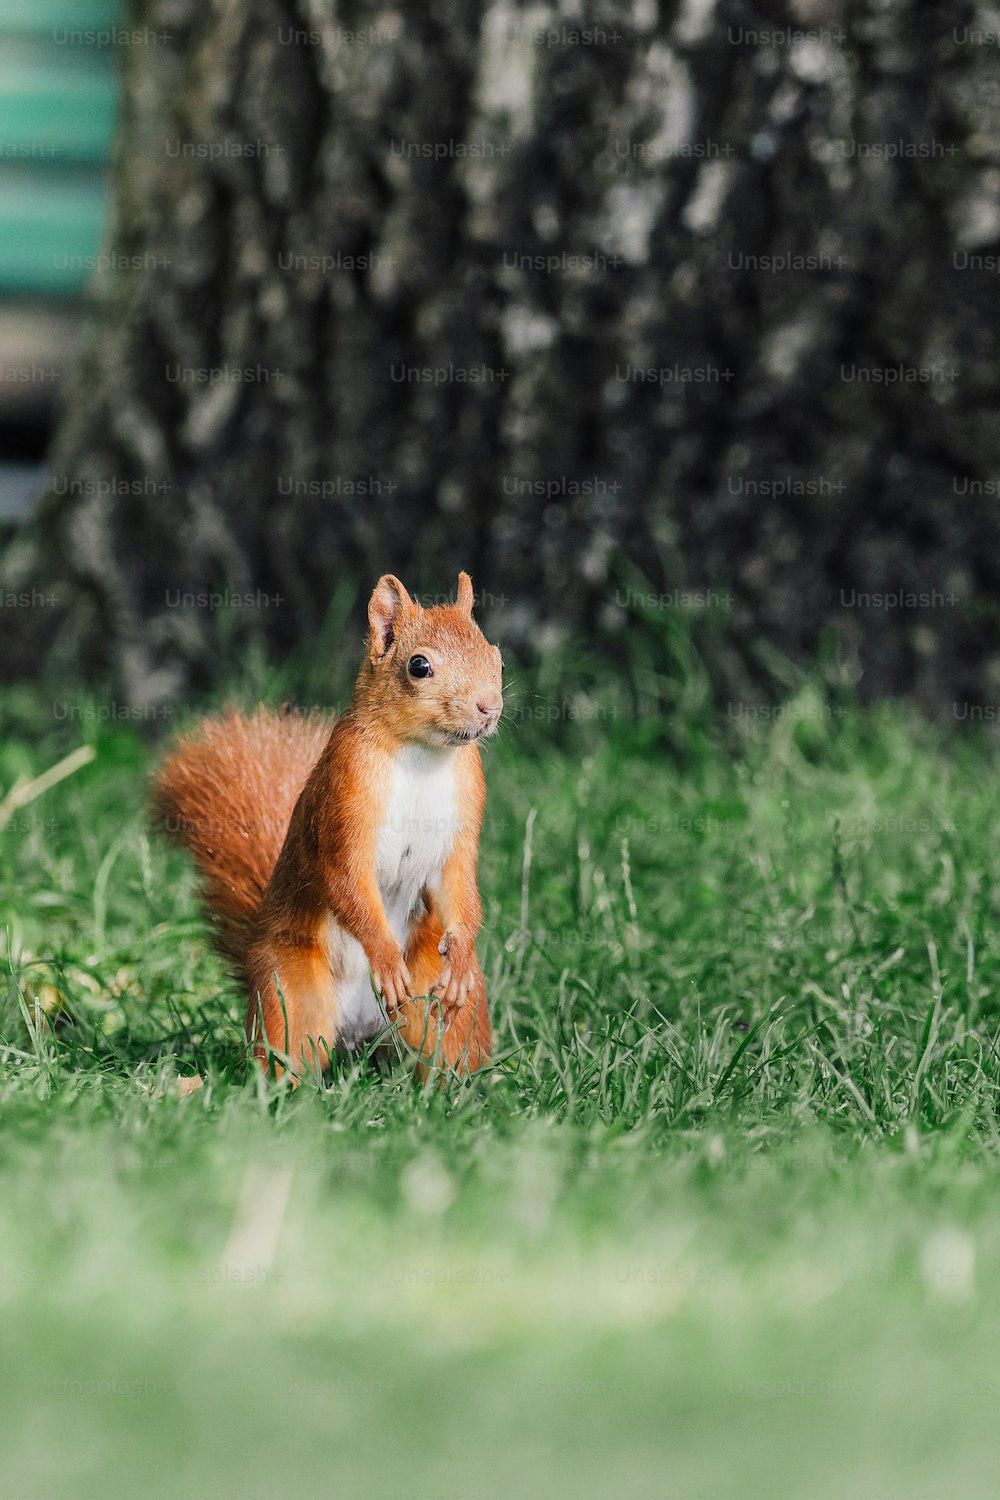 a squirrel standing in grass